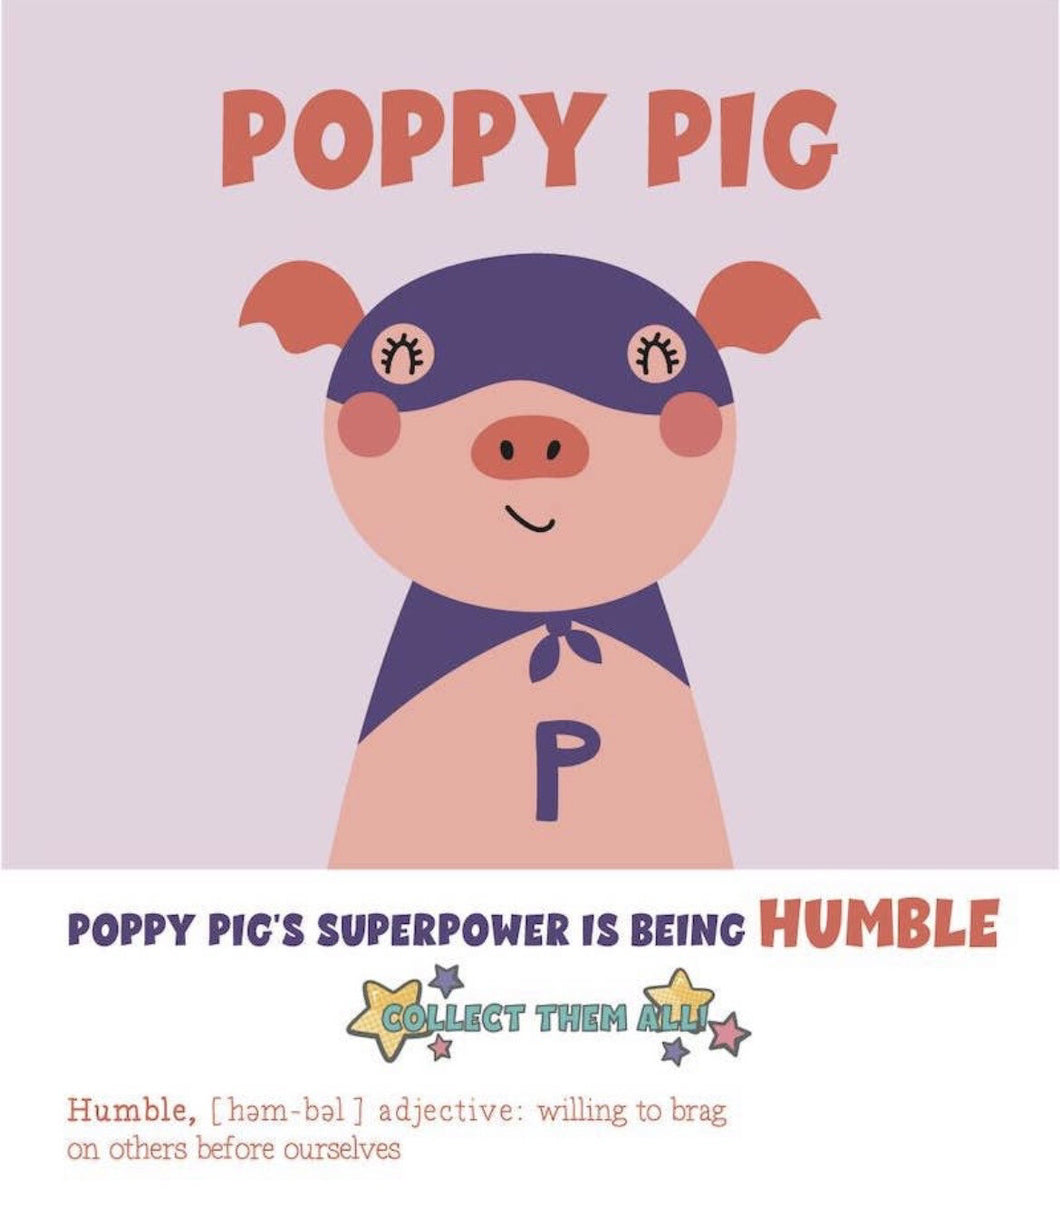 Kid's Paint by Numbers Kit - Poppy Pig